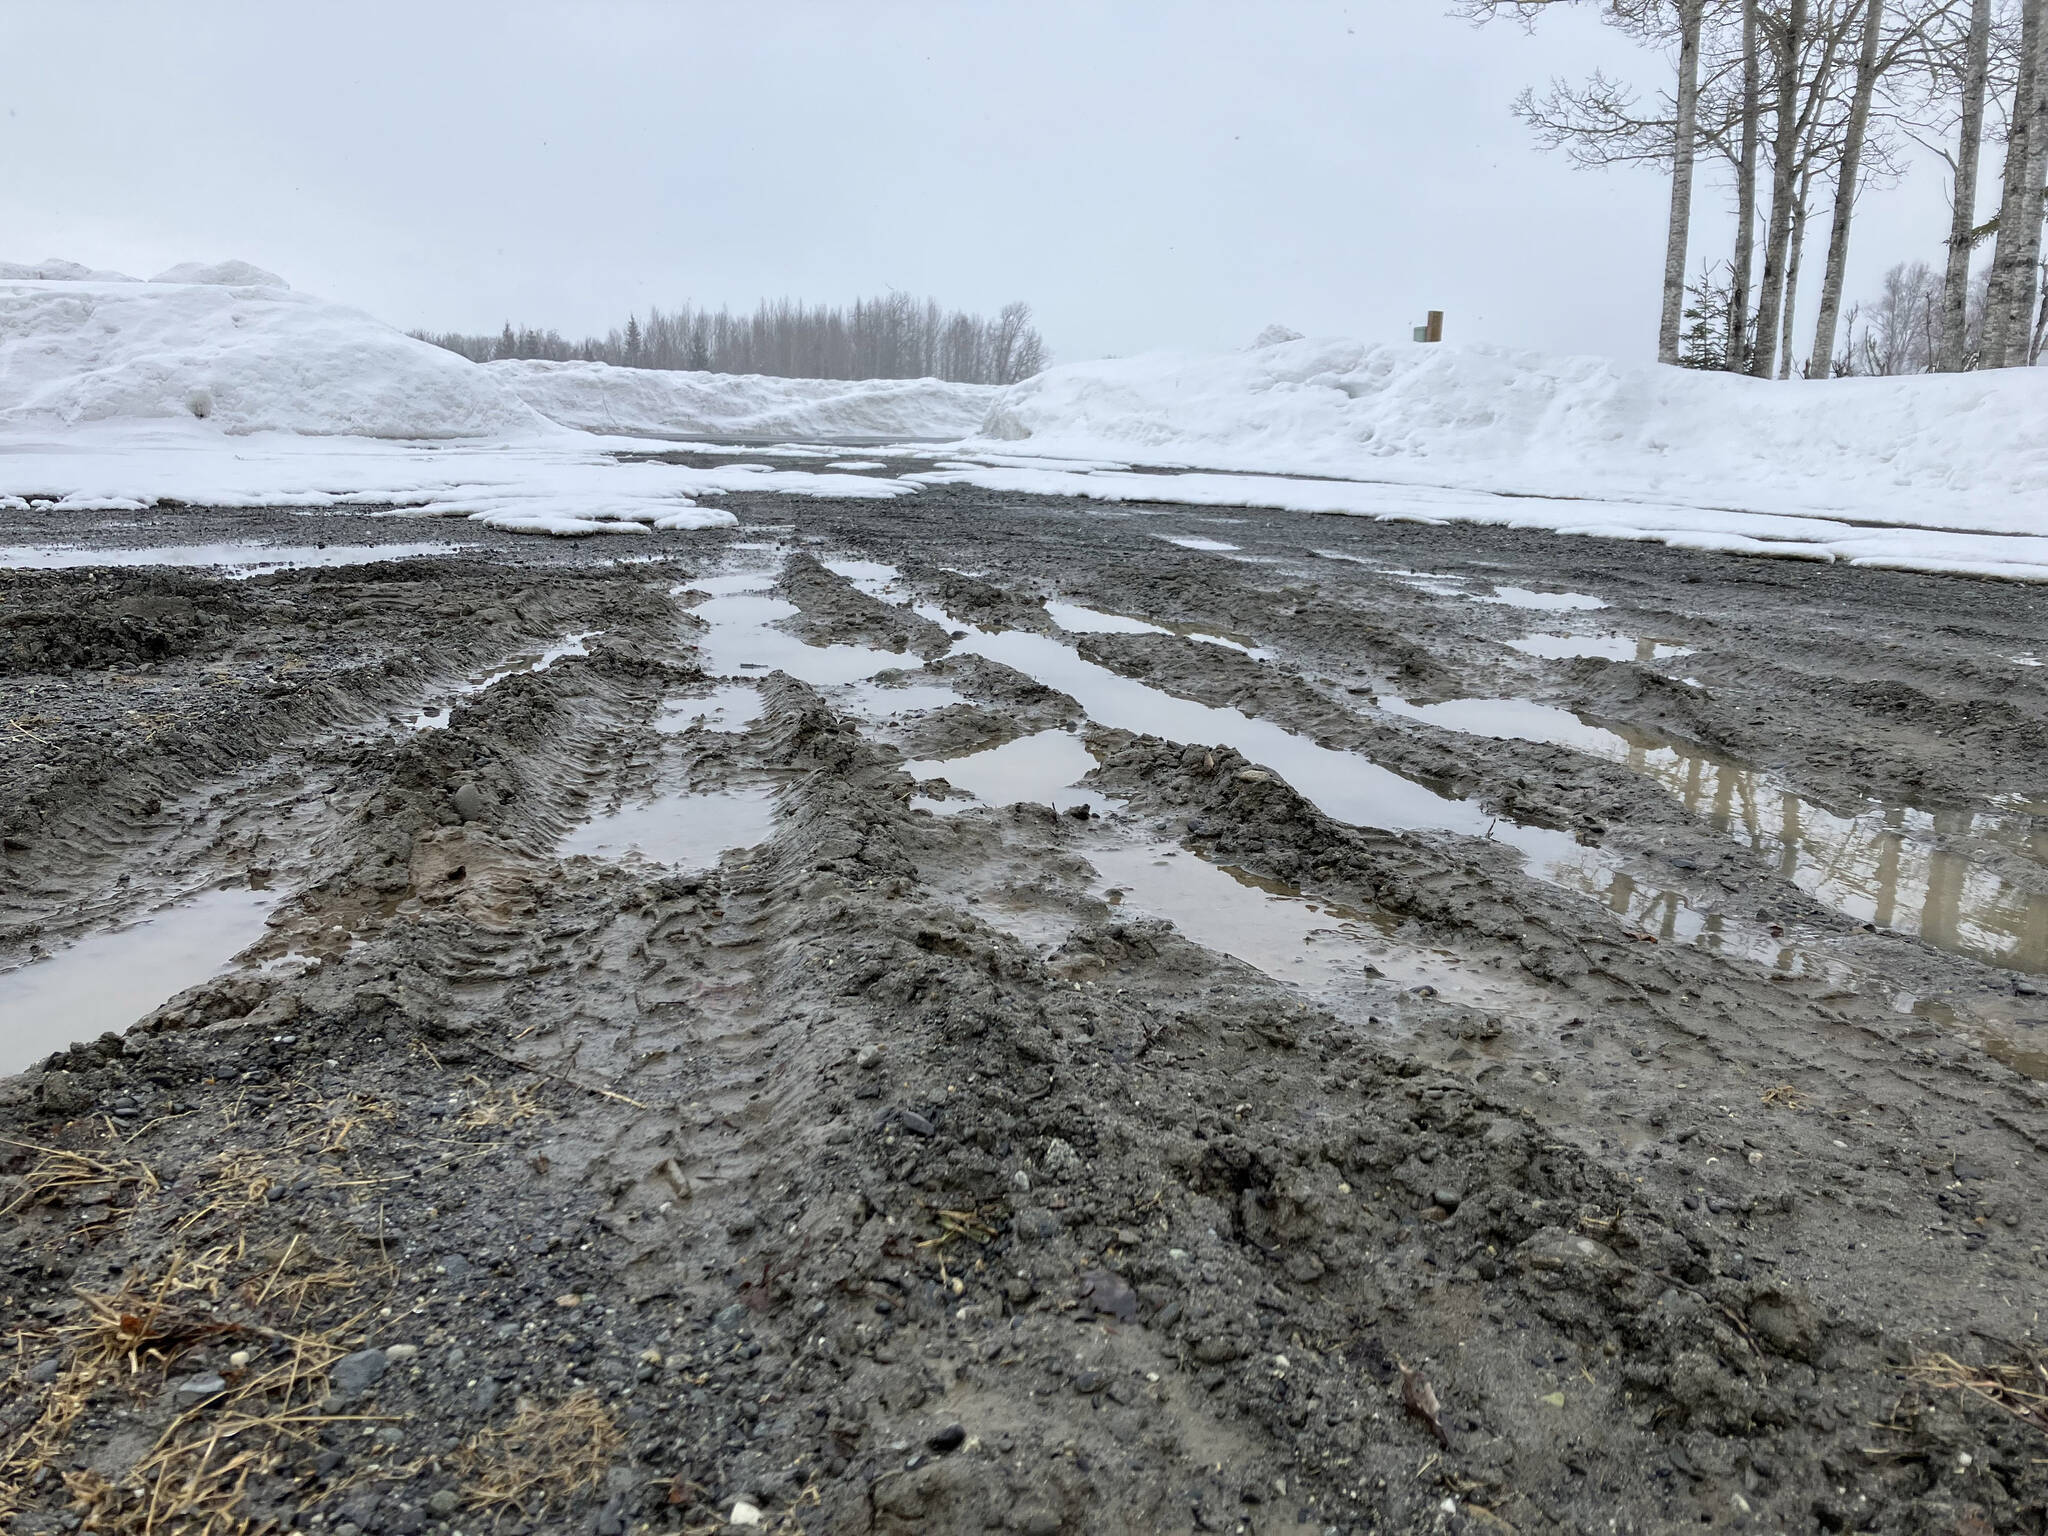 Photo courtesy Sarah McMinn
Snow falls on tire tracks and puddles of water in the mud outside the home of Jake Dye in Soldotna, Alaska, on Thursday, April 13, 2023.